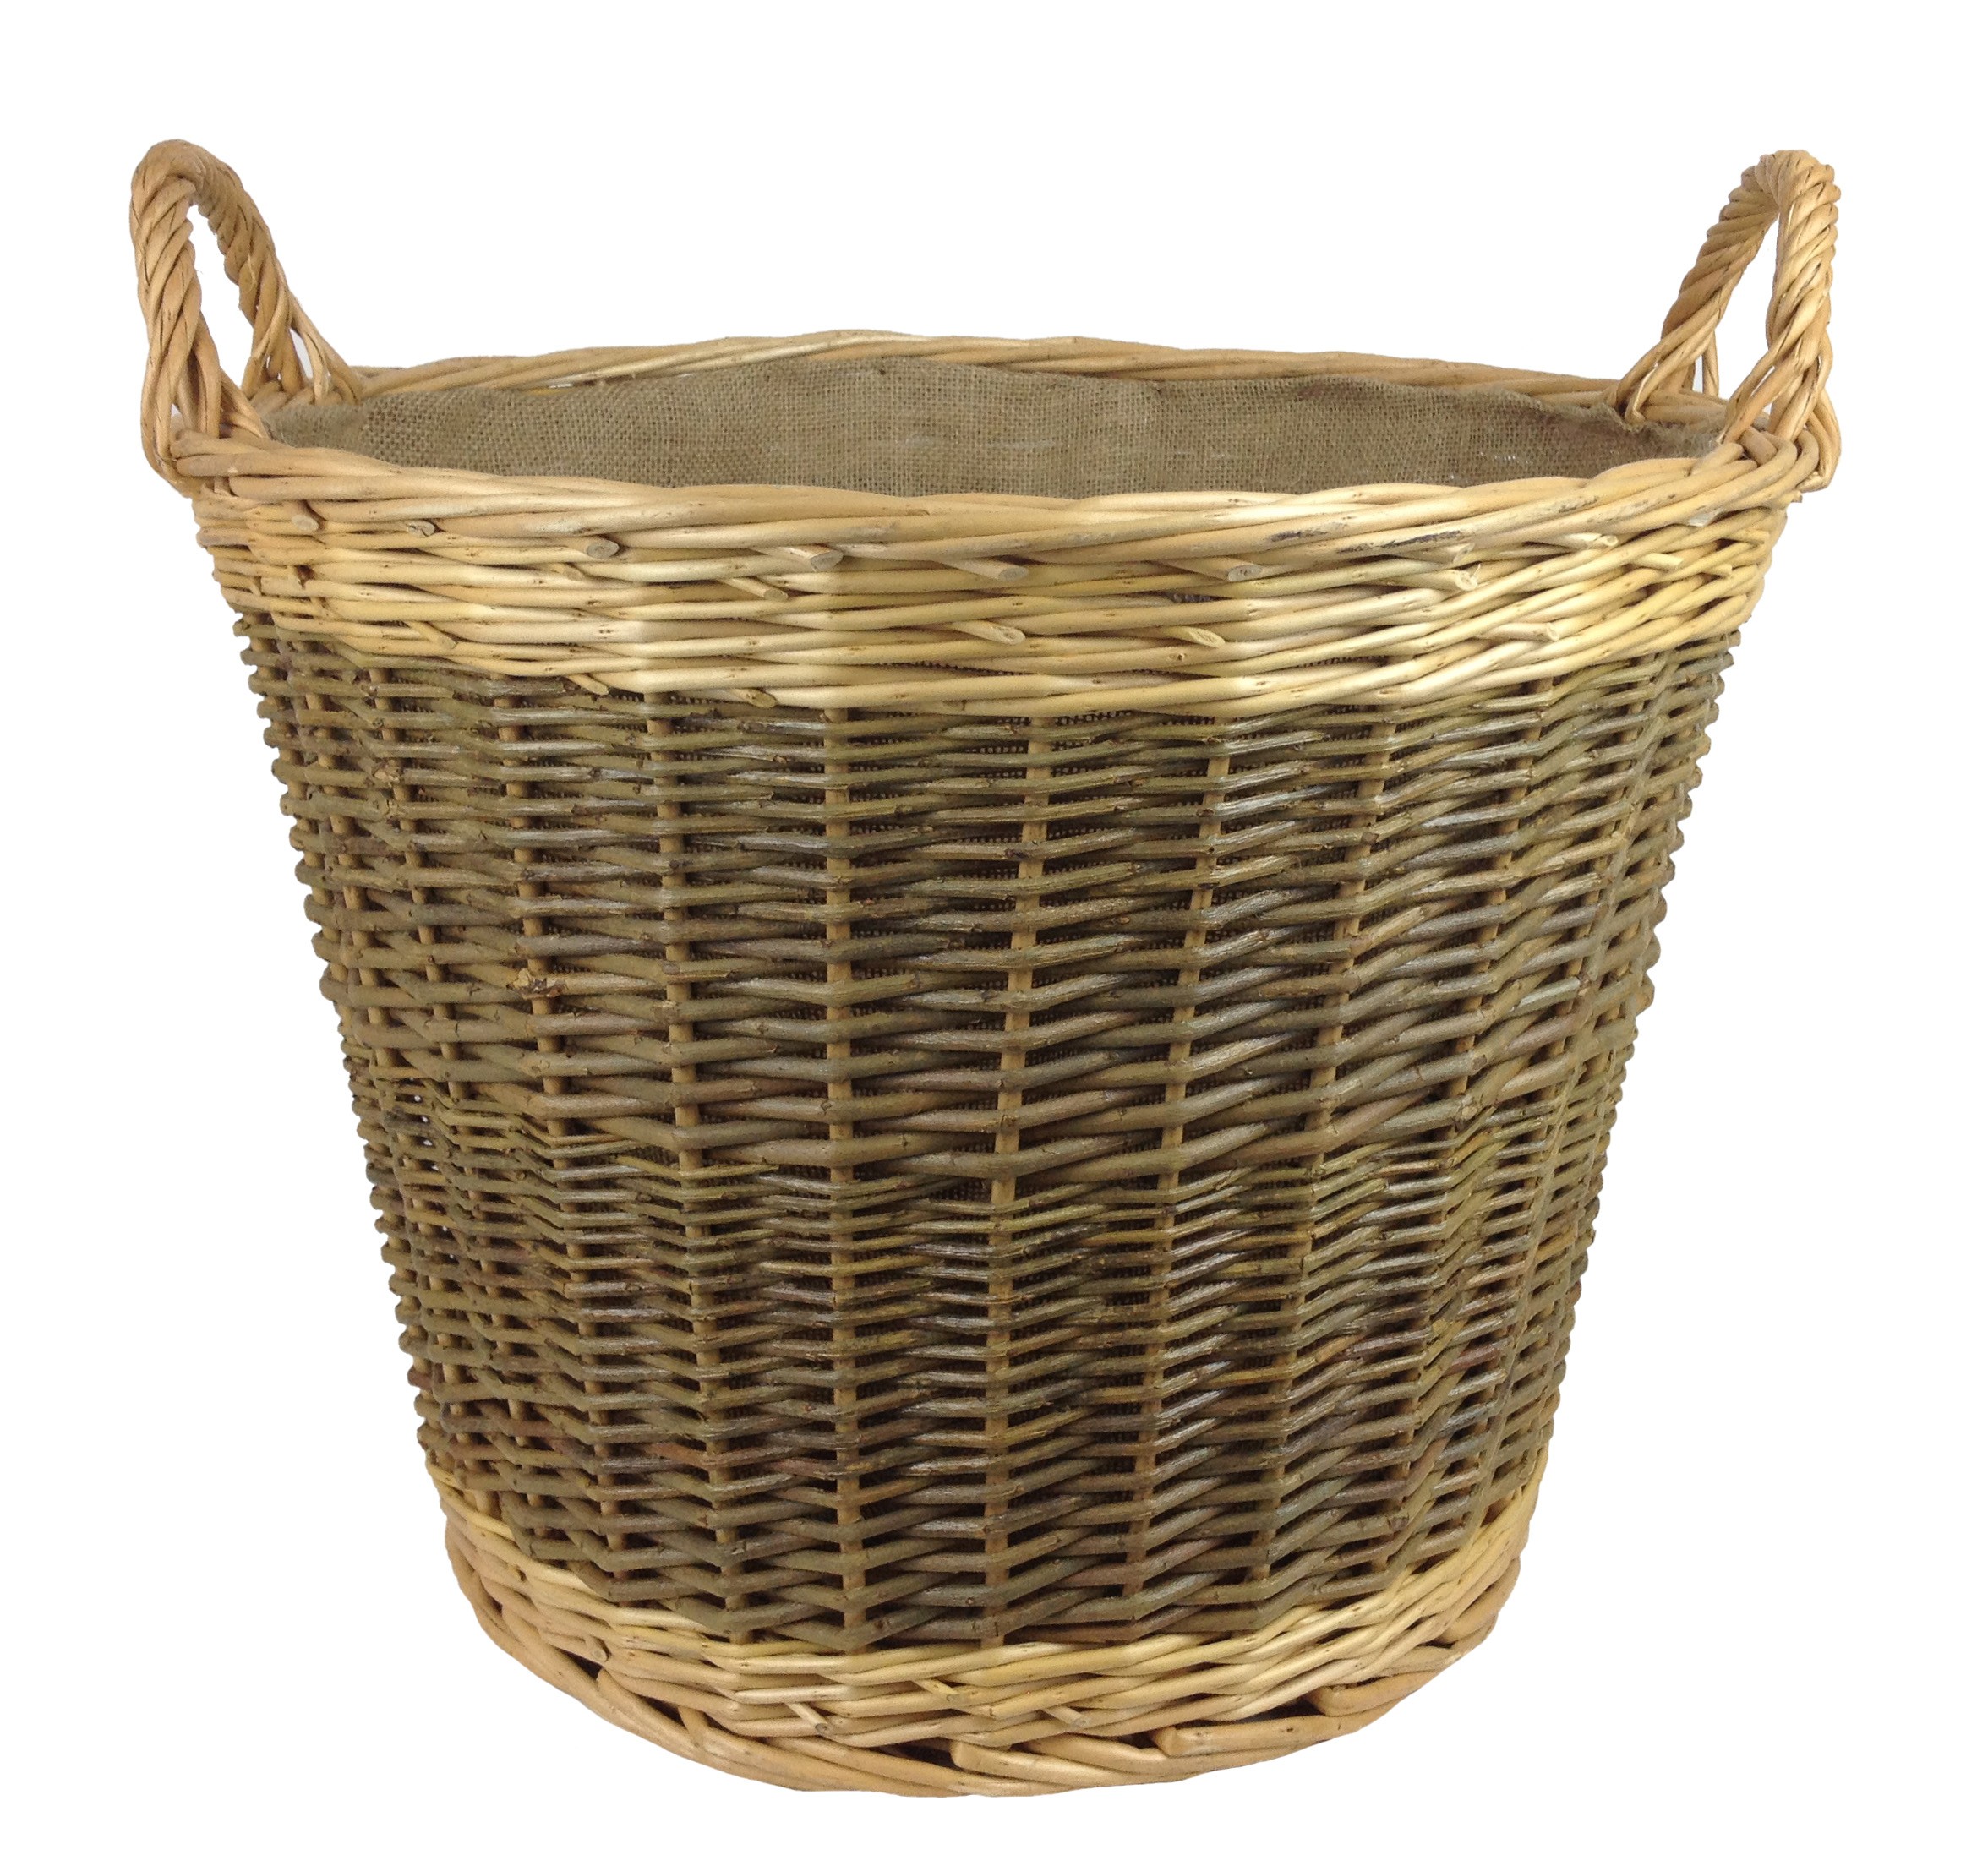 unpeeled-log-basket-with-lining